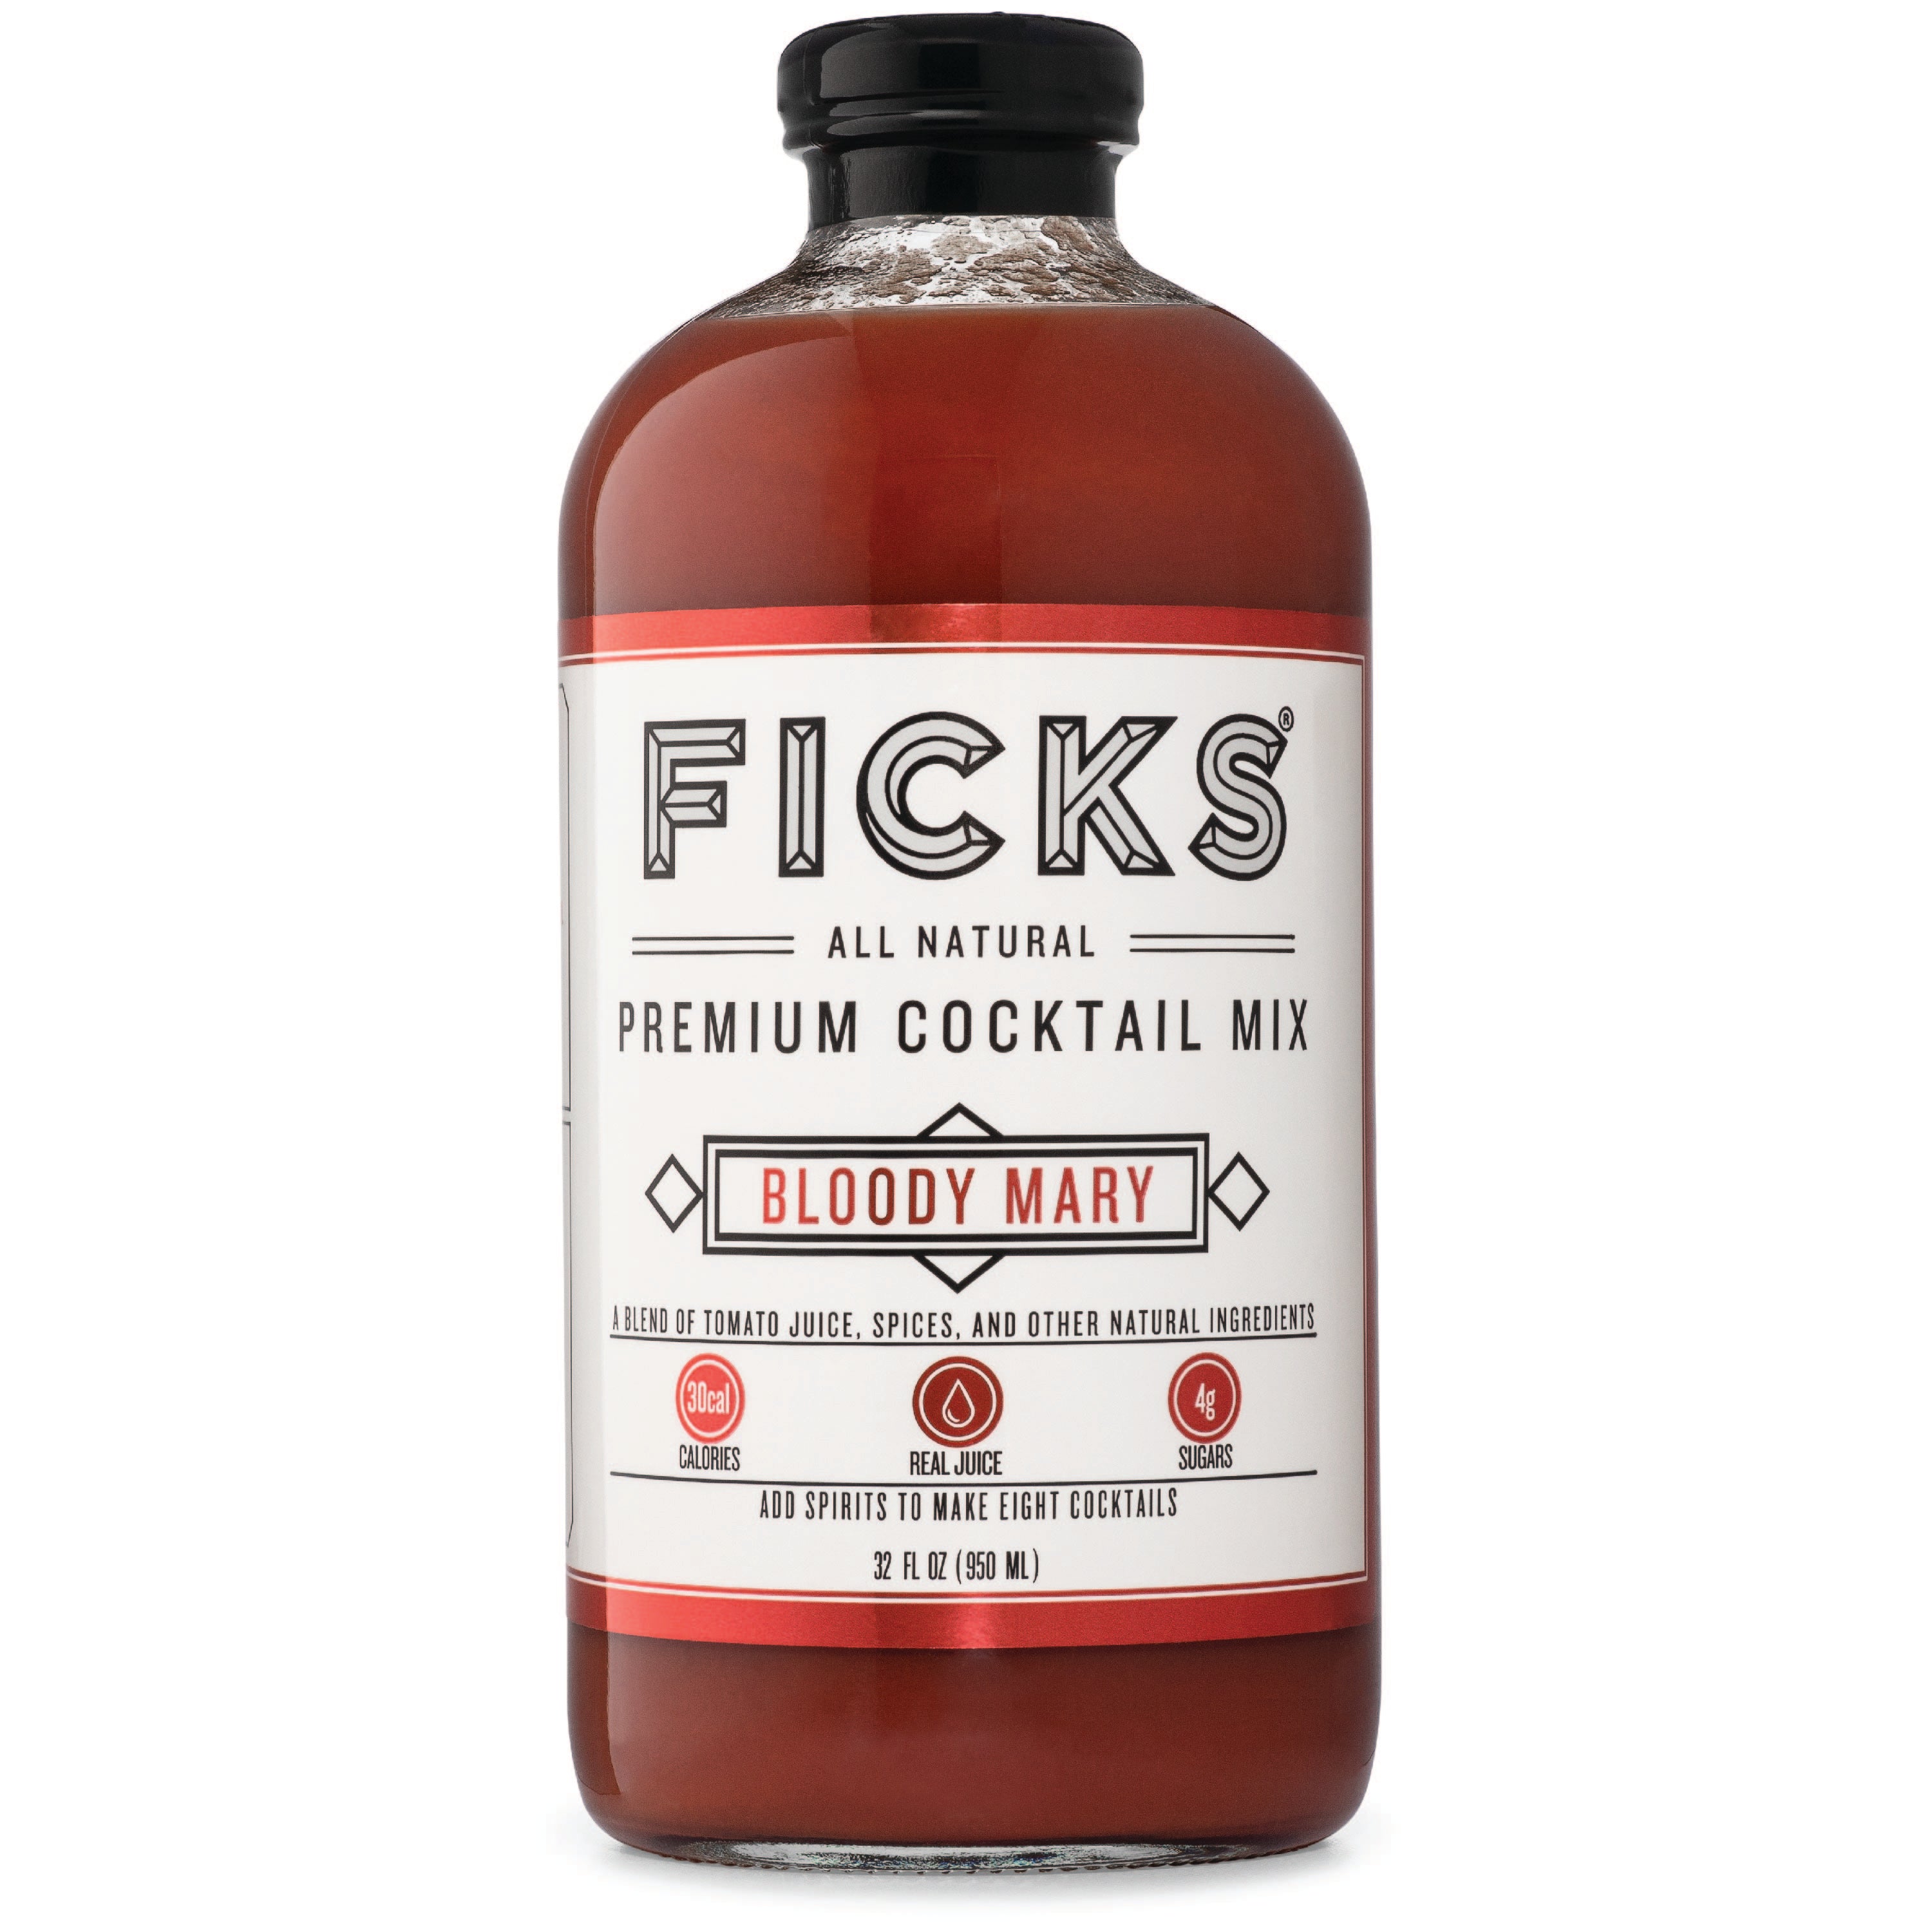 FICKS Bloody Mary Cocktail Mix Beverage